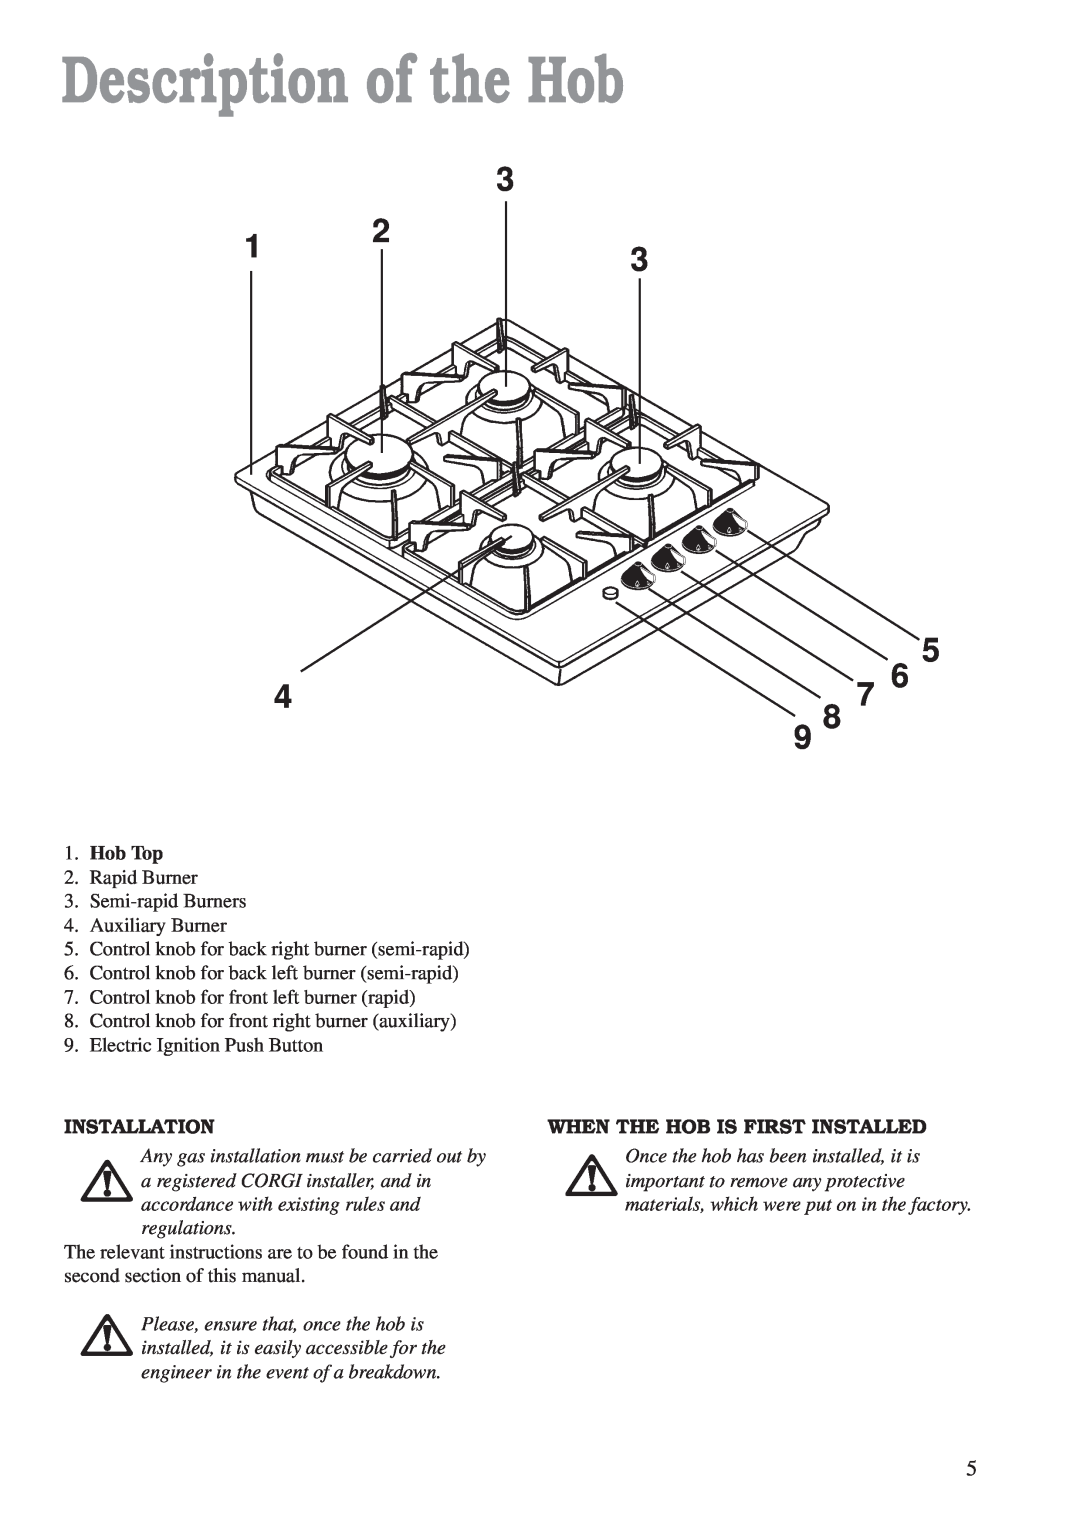 Zanussi ZAF 42 manual Description of the Hob, Hob Top, Installation, When The Hob Is First Installed 